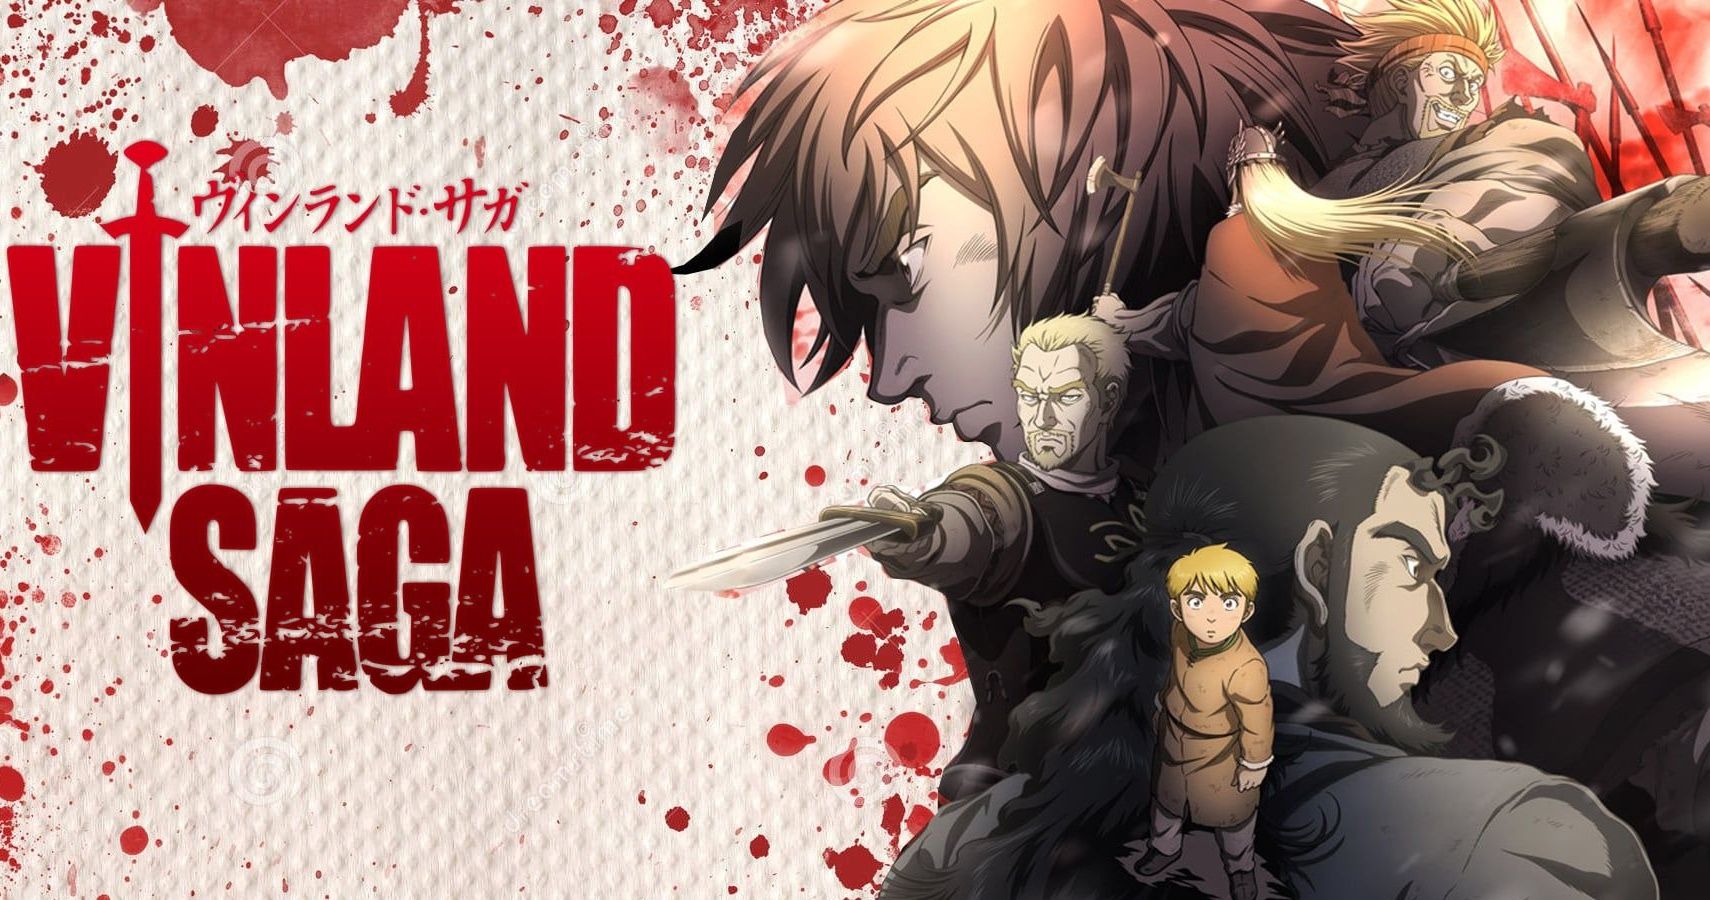 Vinland Saga: 10 Reasons Why It's A Must-Watch Anime Series